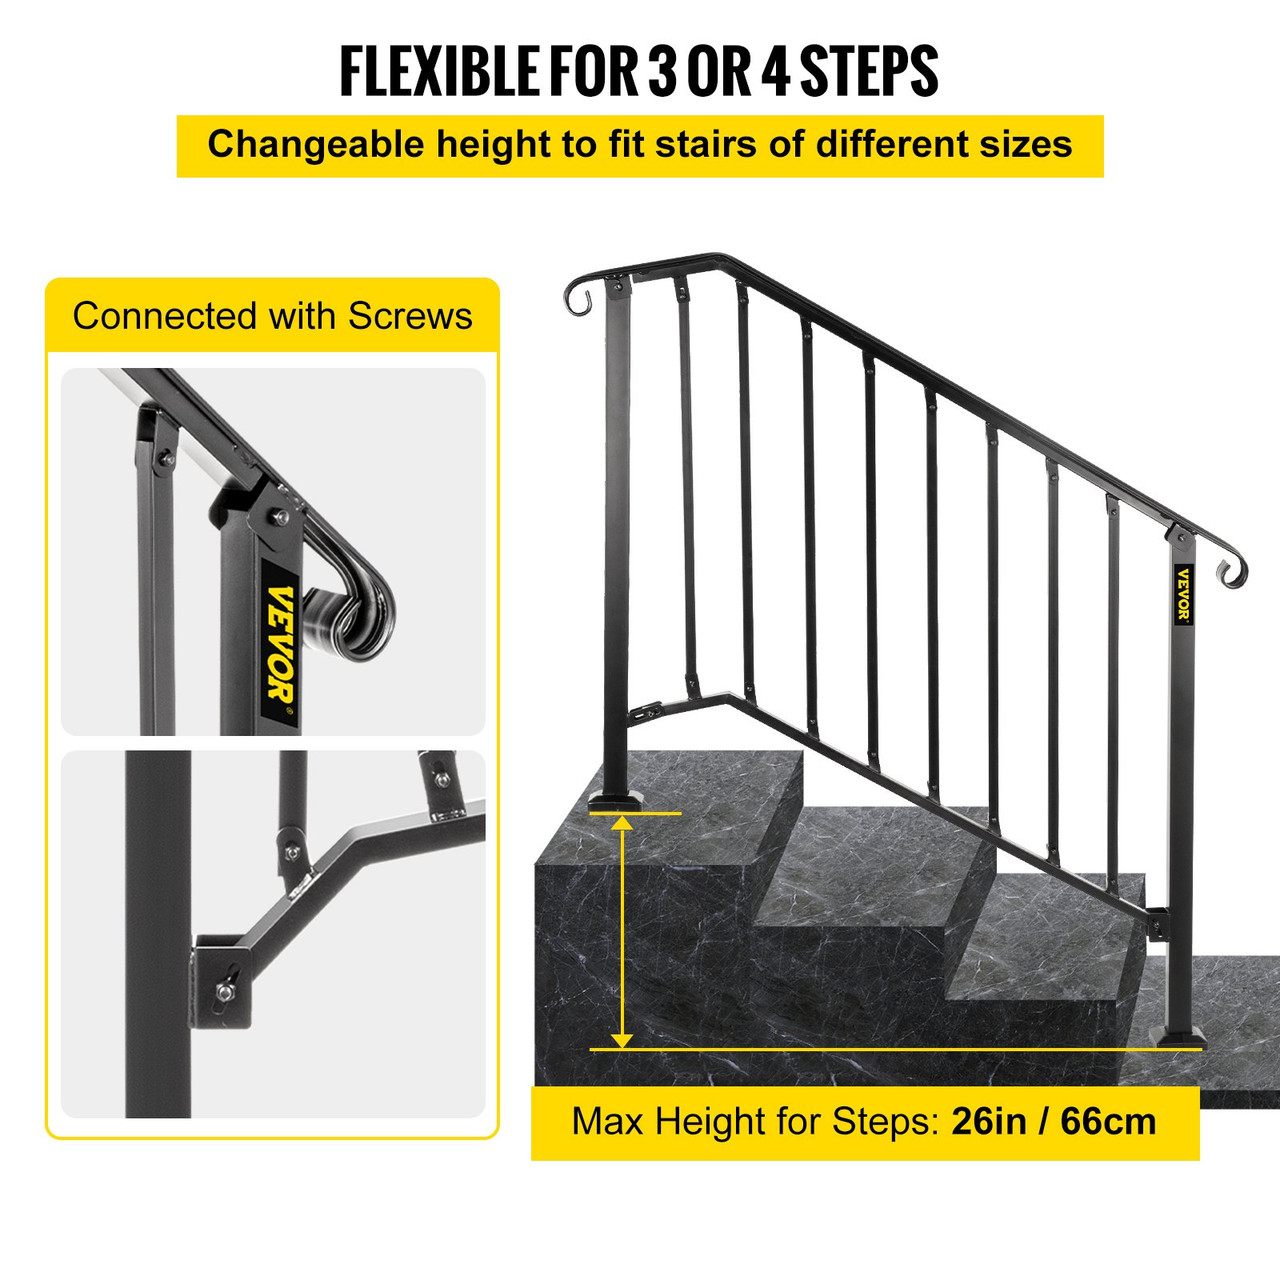 Handrails for Outdoor Steps, Fit 3 or 4 Steps Outdoor Stair Railing, Picket#3 Wrought Iron Handrail, Flexible Porch Railing, Black Transitional Handrails for Concrete Steps or Wooden Stairs